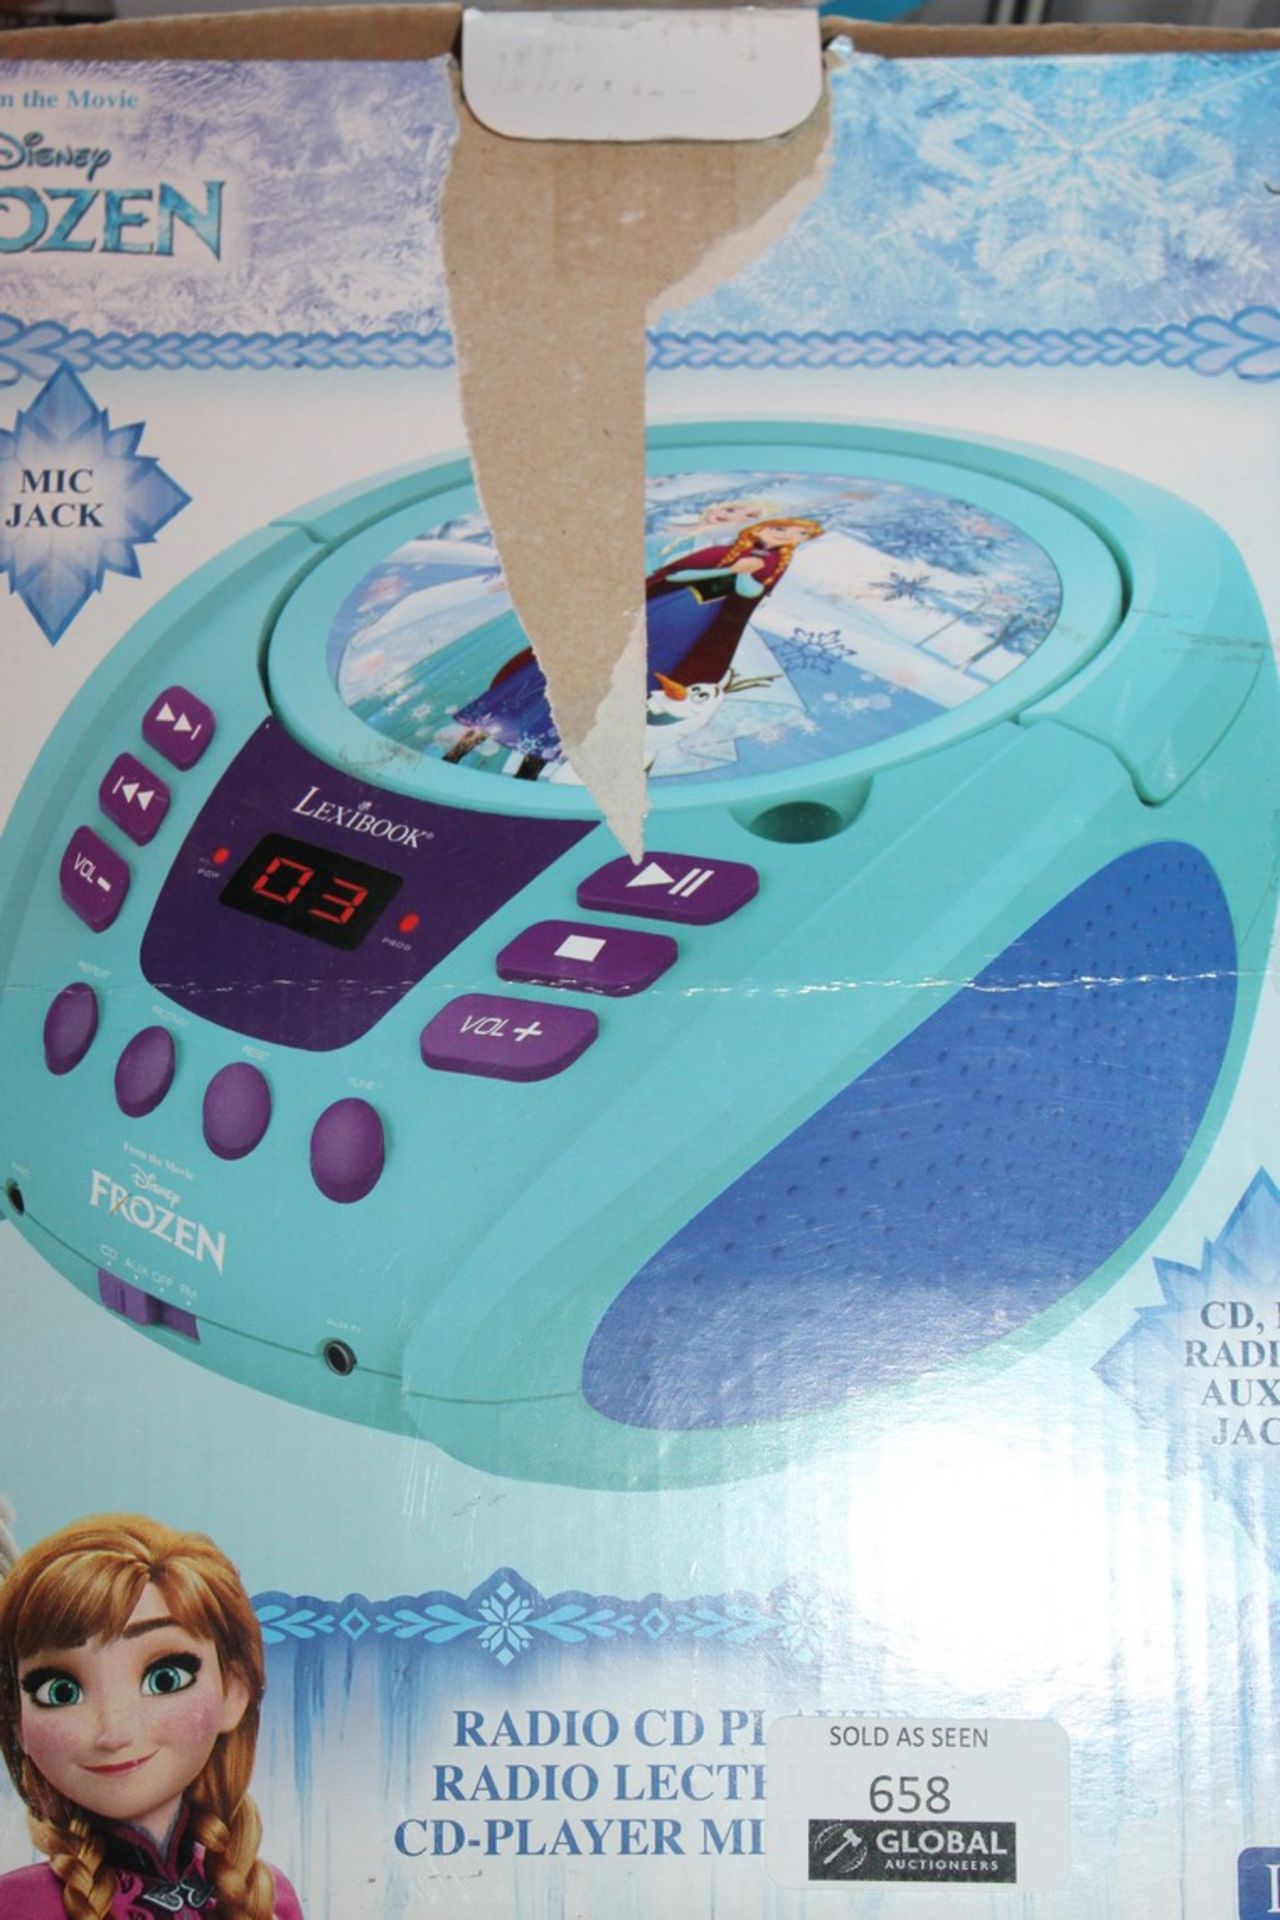 Lot to Contain 2 Assorted Items, To Include Disney Frozen Radio CD Player, Kenwood Hand Blender,